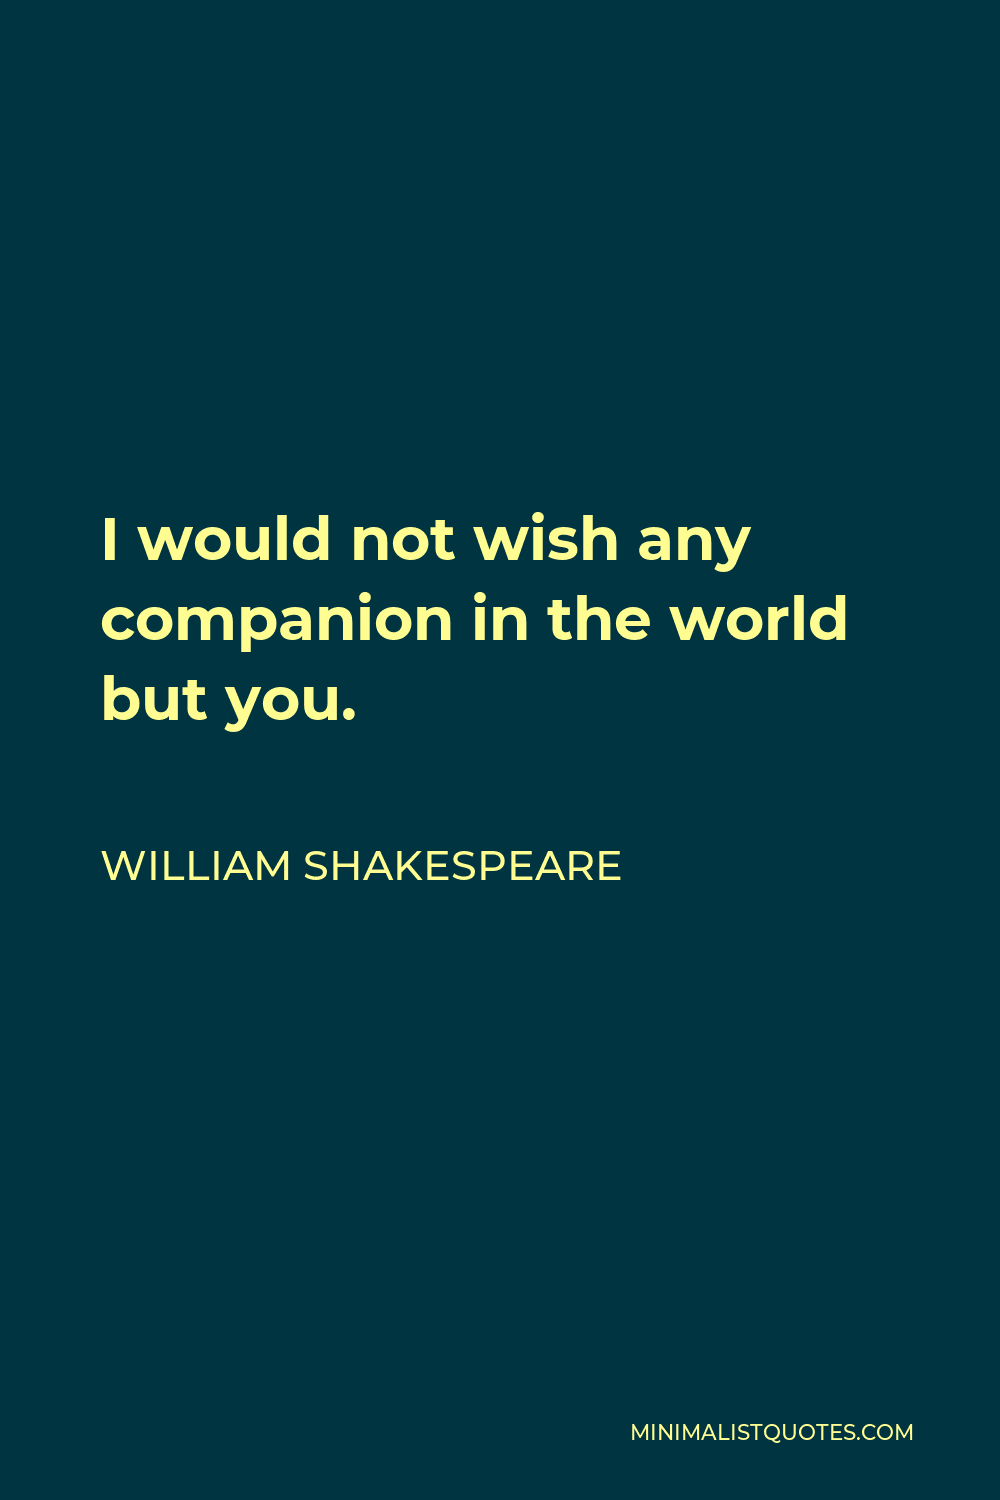 William Shakespeare Quote - I would not wish any companion in the world but you.